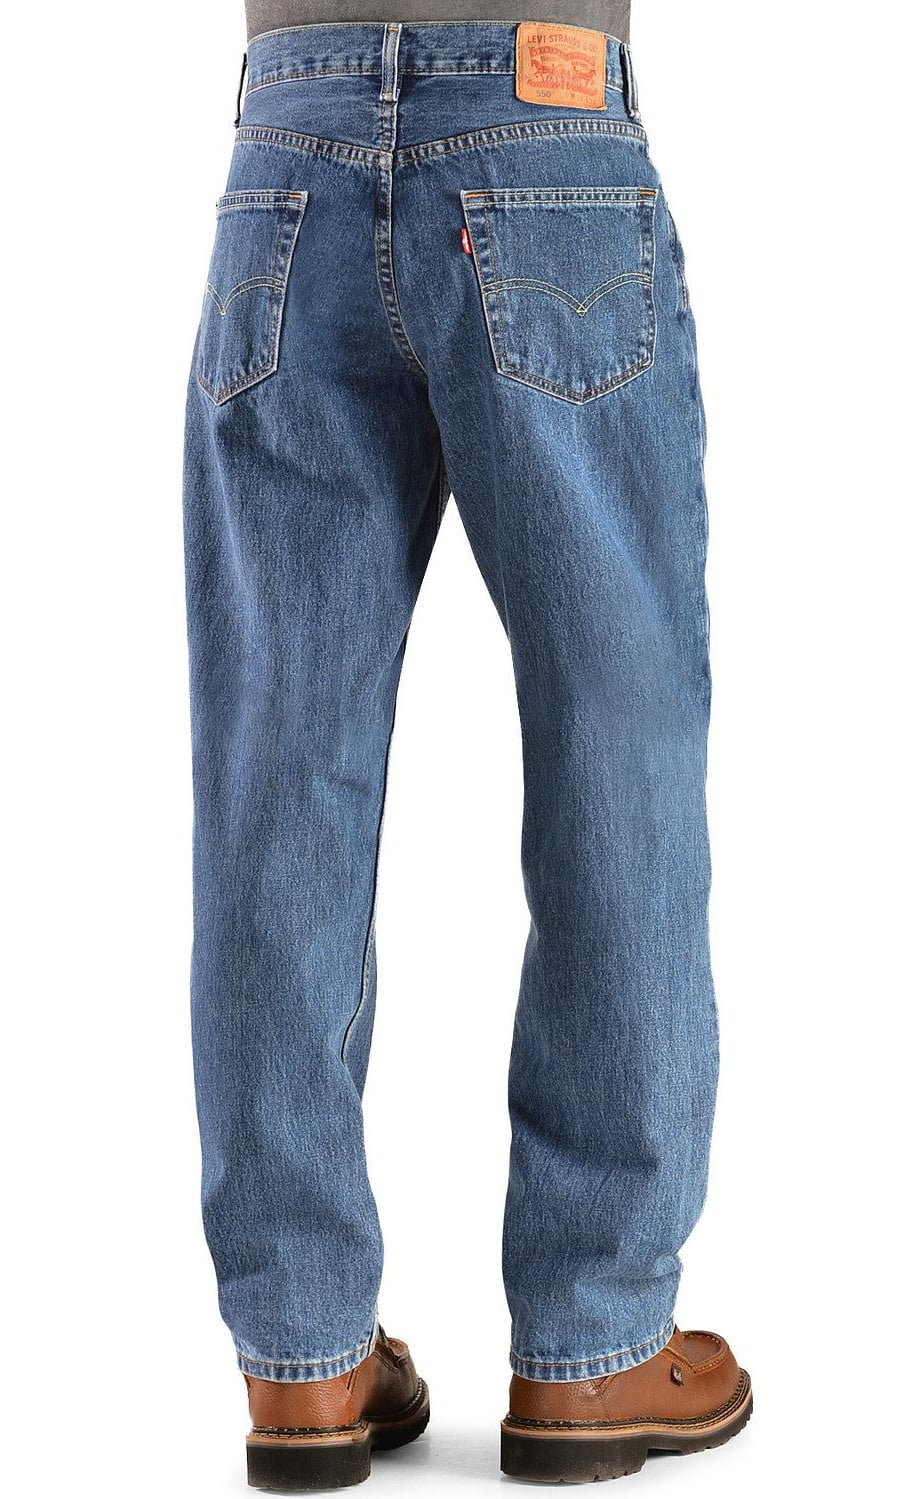 Levis® 550 Relaxed Fit Jeans in Medium Stonewash 